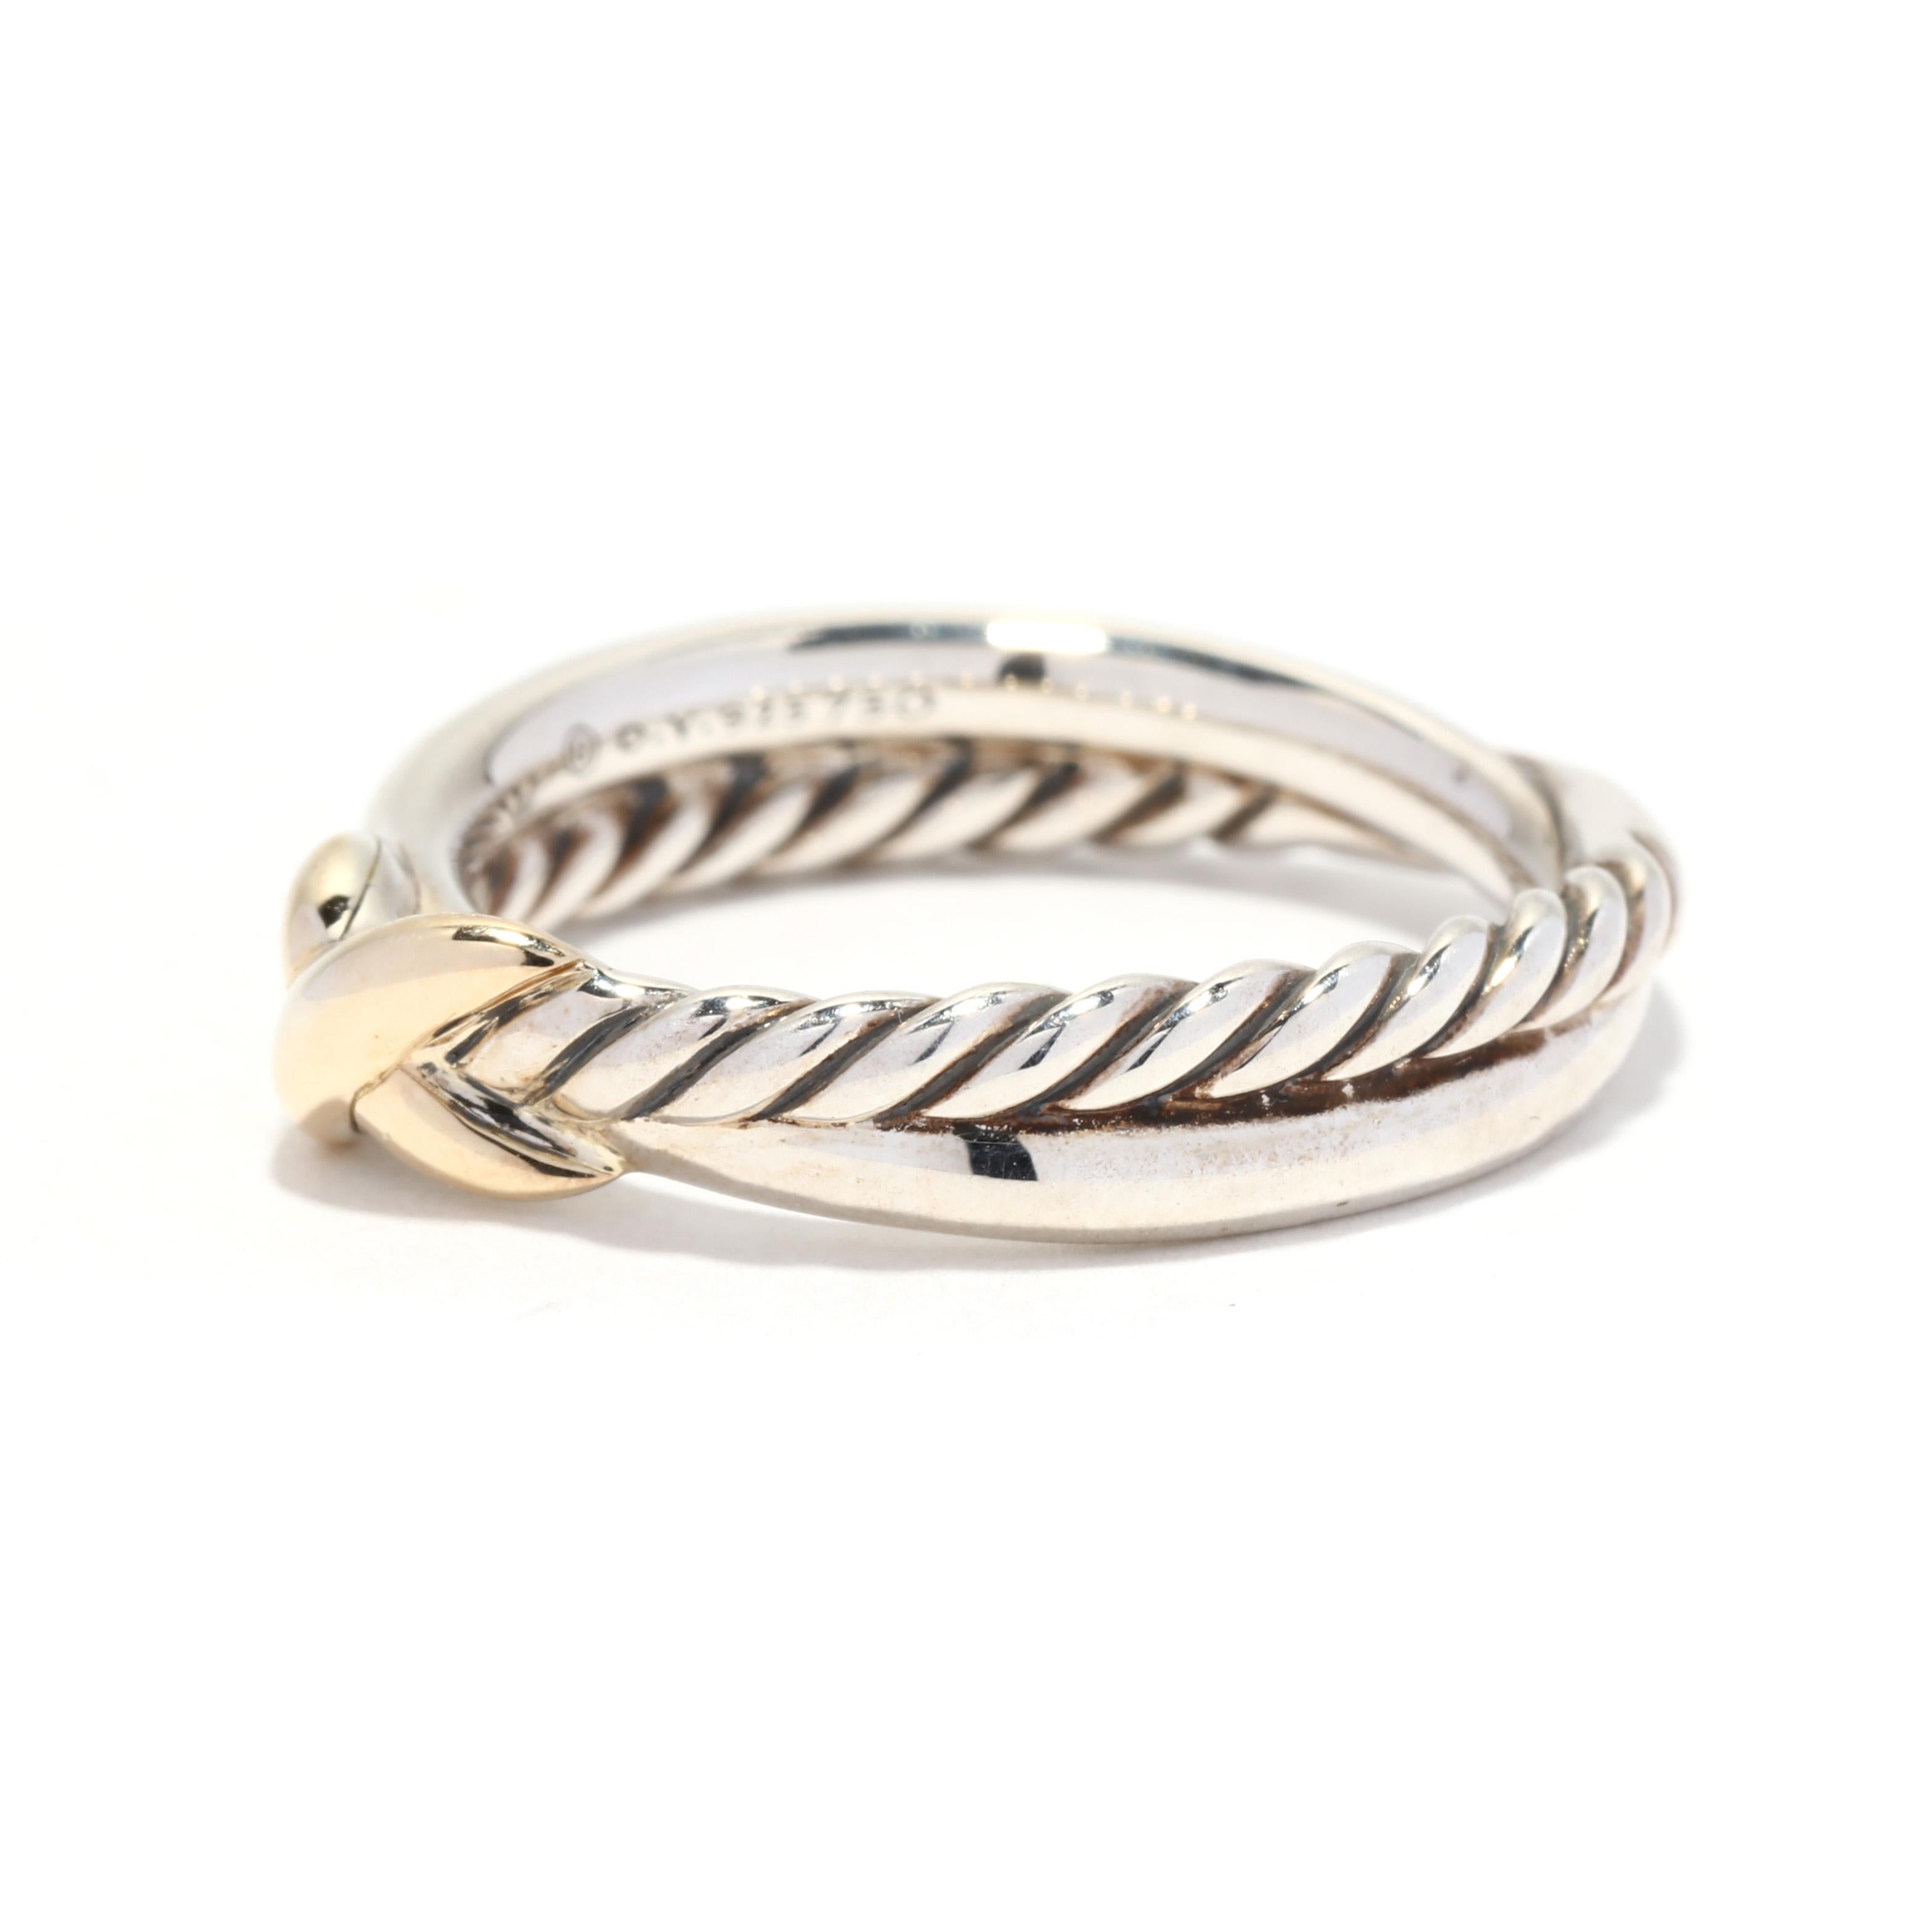 x crossover band ring with 18k yellow gold